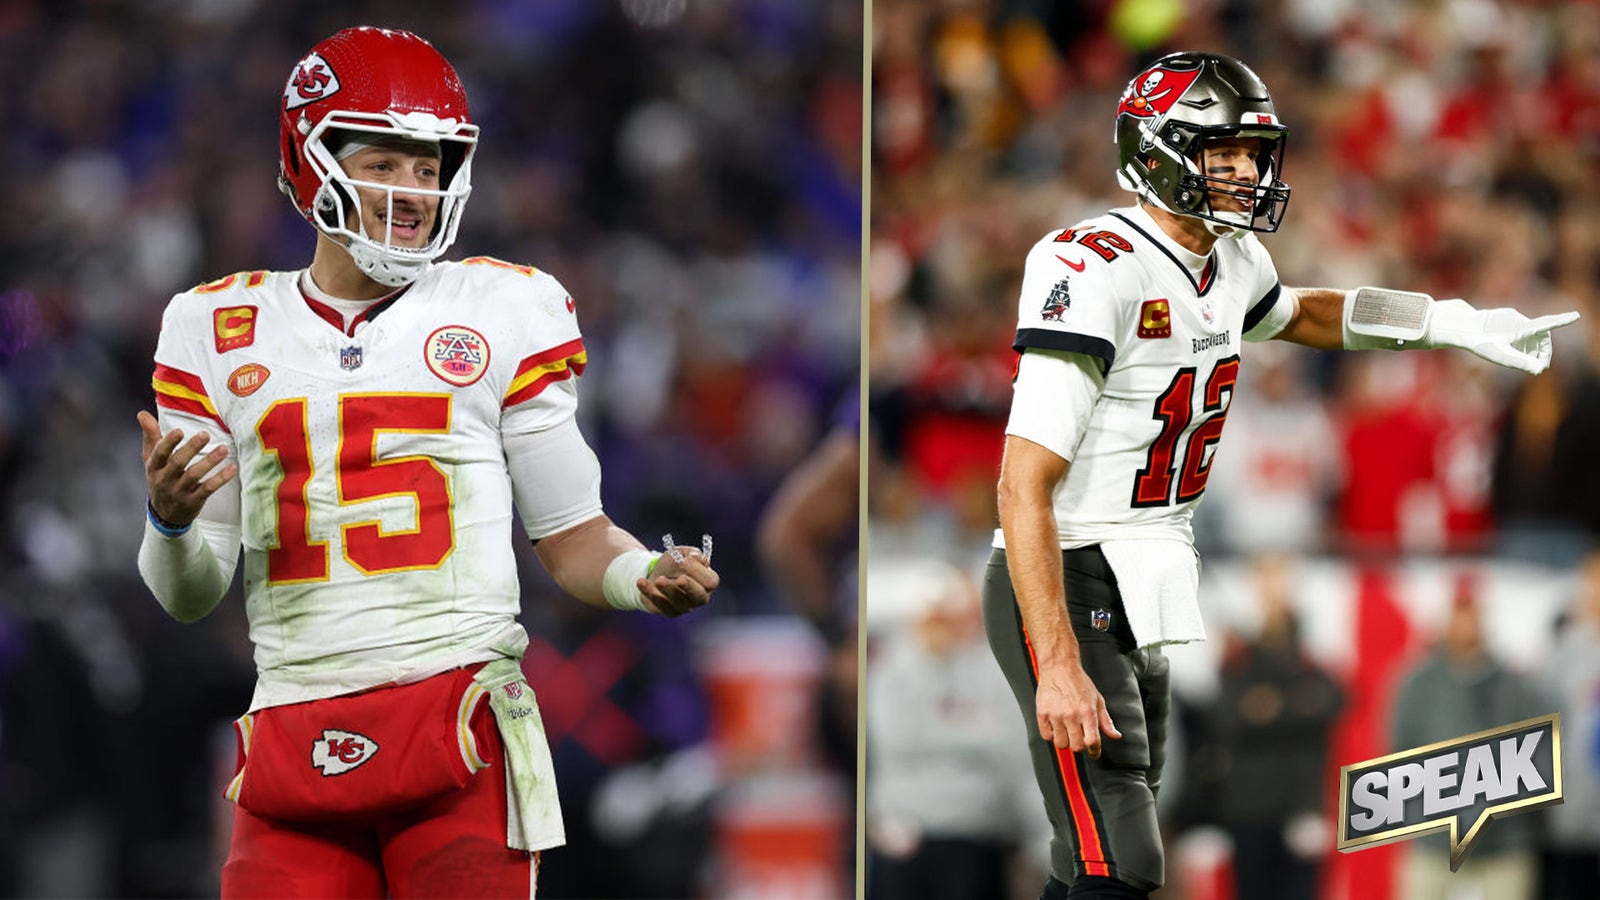 Does Mahomes need to pass Brady in Super Bowl rings to be the GOAT? 